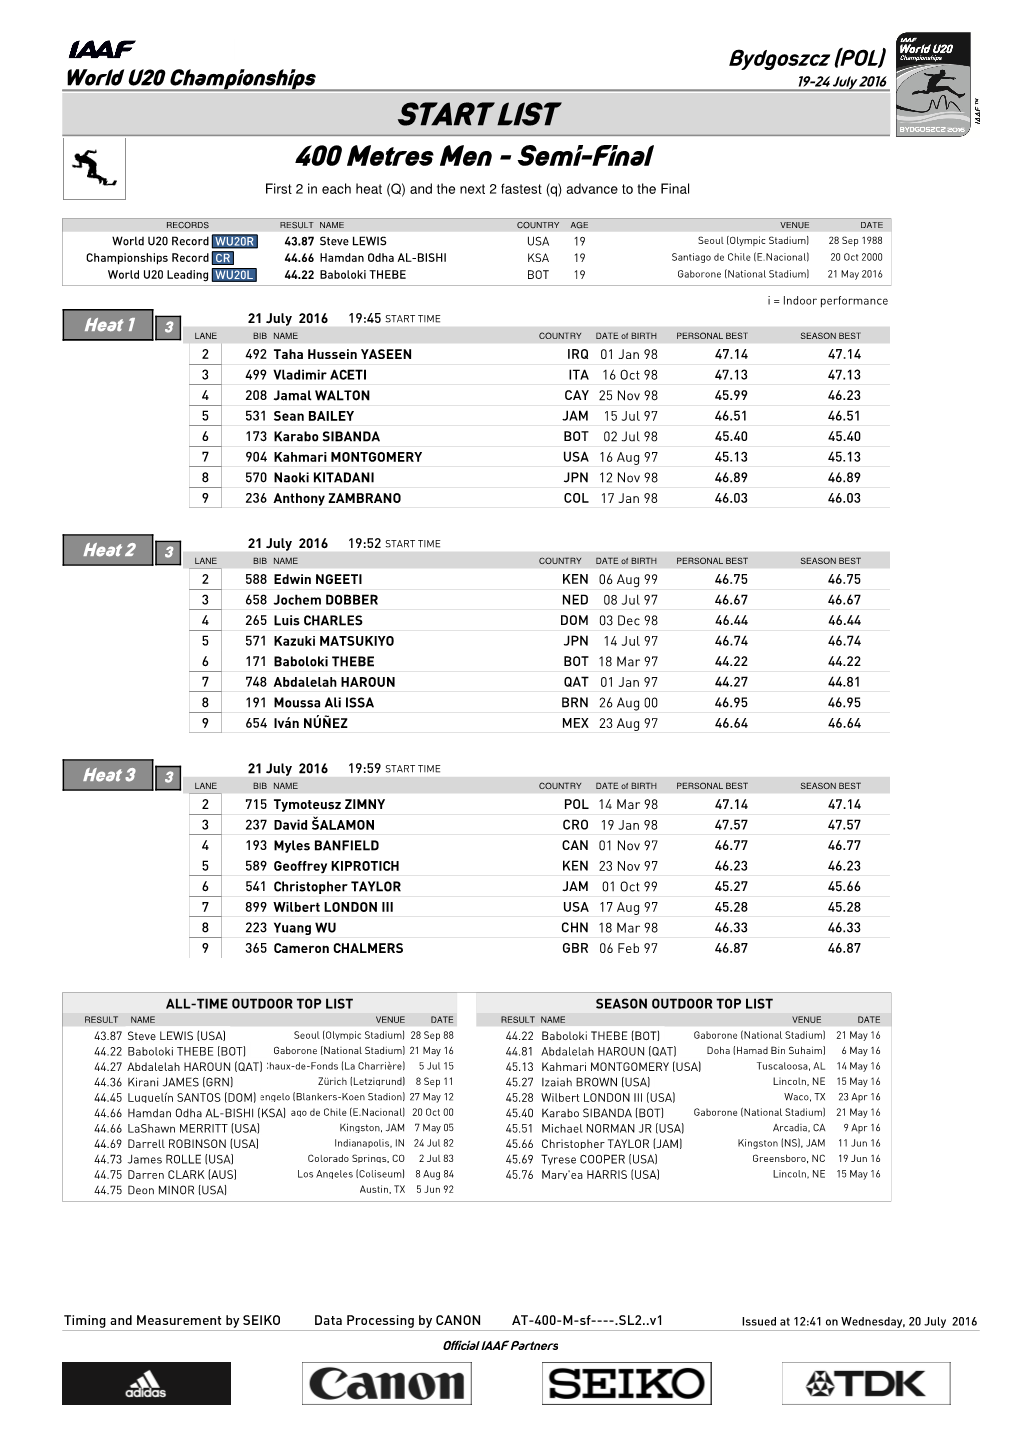 START LIST 400 Metres Men - Semi-Final First 2 in Each Heat (Q) and the Next 2 Fastest (Q) Advance to the Final